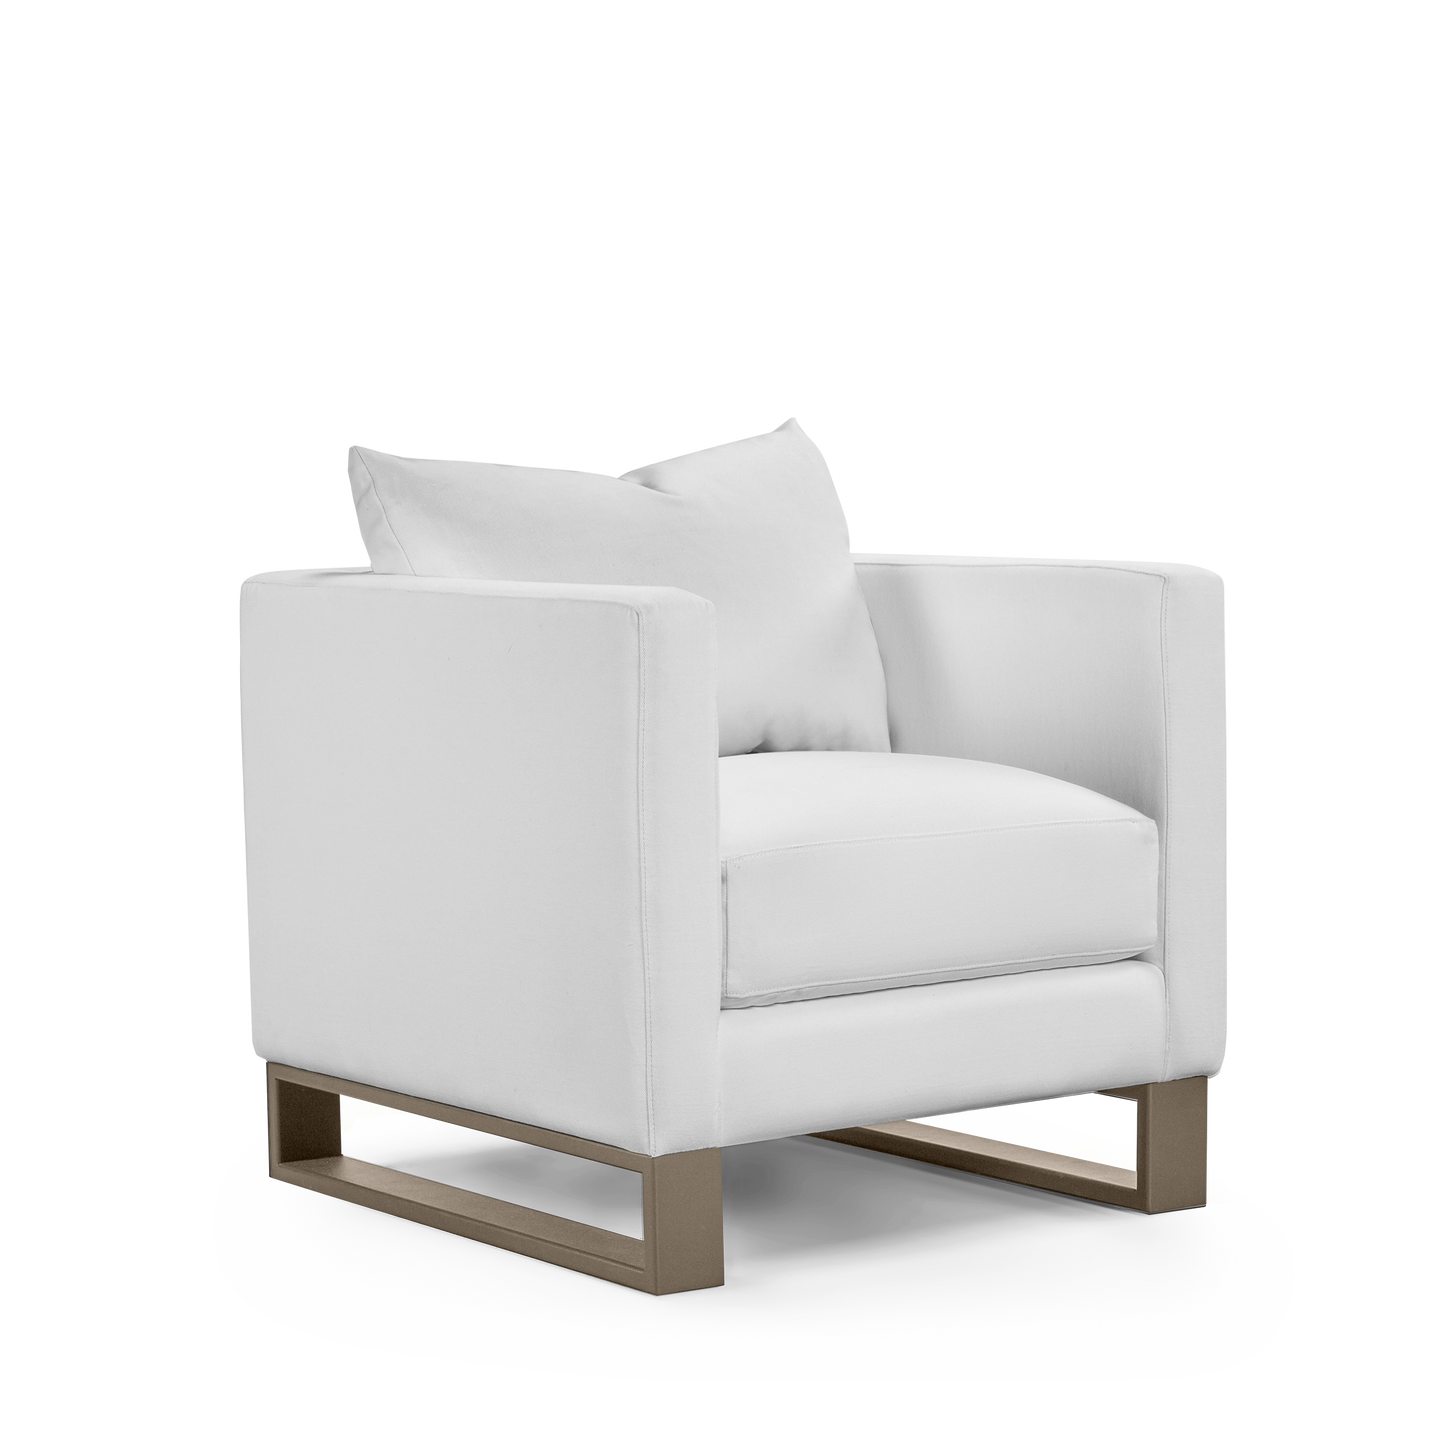 Atlin armchair with linara white textile with champagne legs